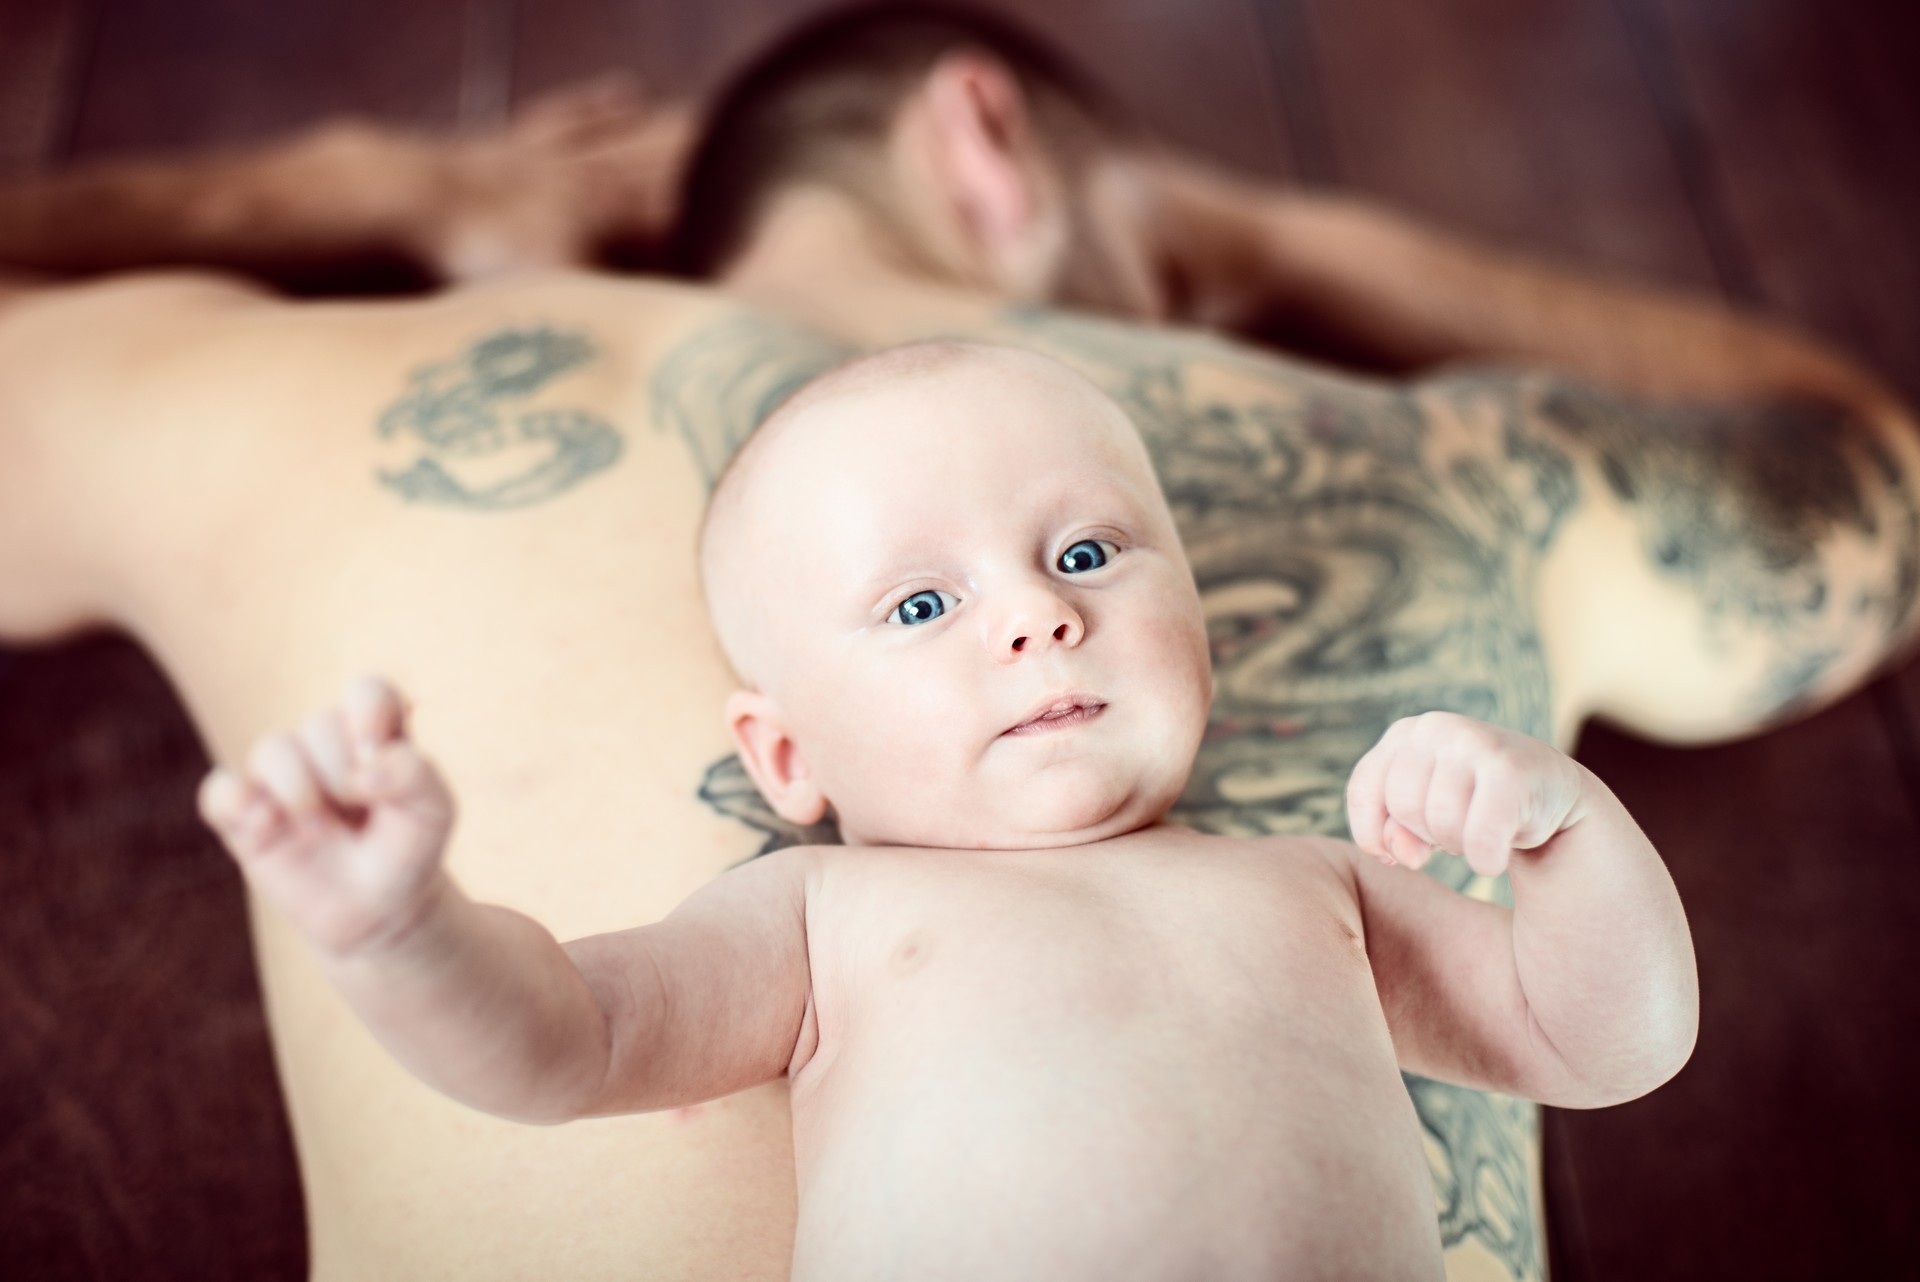 7 Unique Tattoo Ideas to Honor Your Child